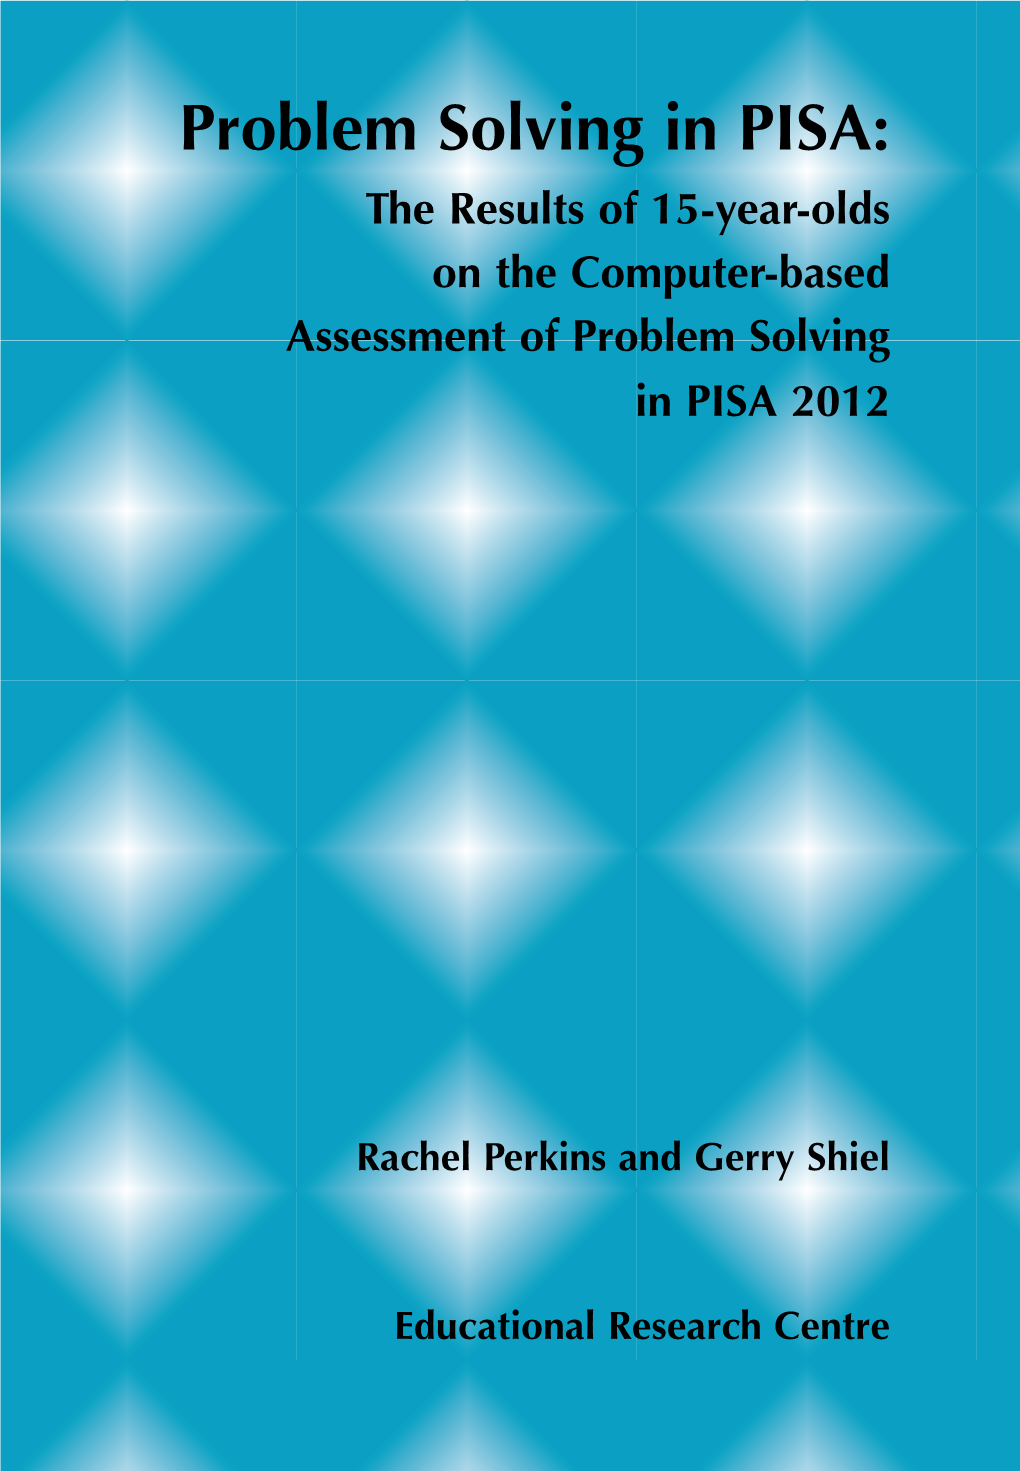 Problem Solving in PISA: the Results of 15-Year-Olds on the Computer-Based Assessment of Problem Solving in PISA 2012